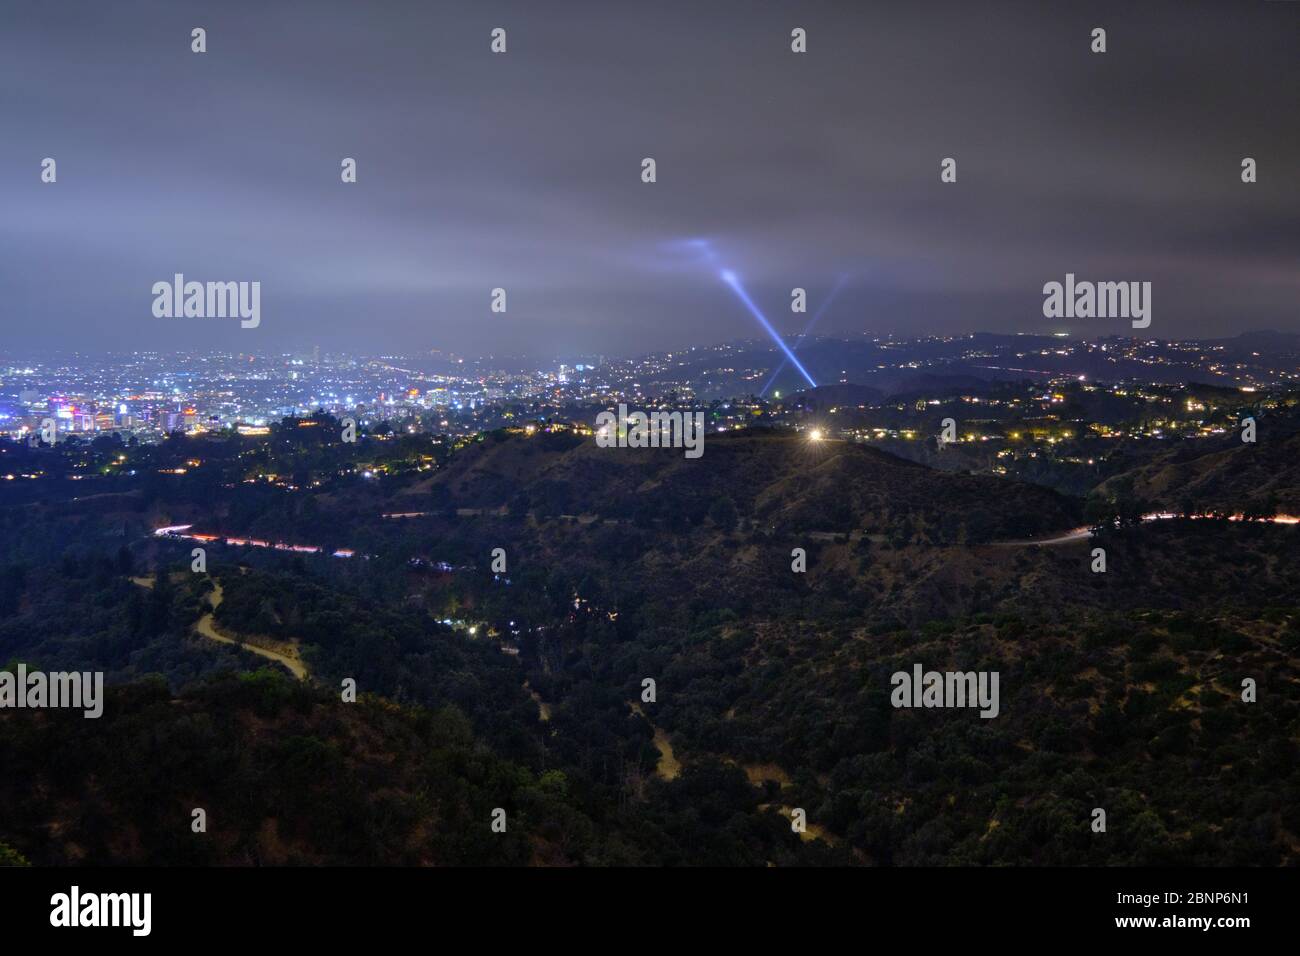 USA, United States of America, California, Los Angeles, Downtown, Hollywood, Beverly Hills, view from Griffith Observatory by night Stock Photo